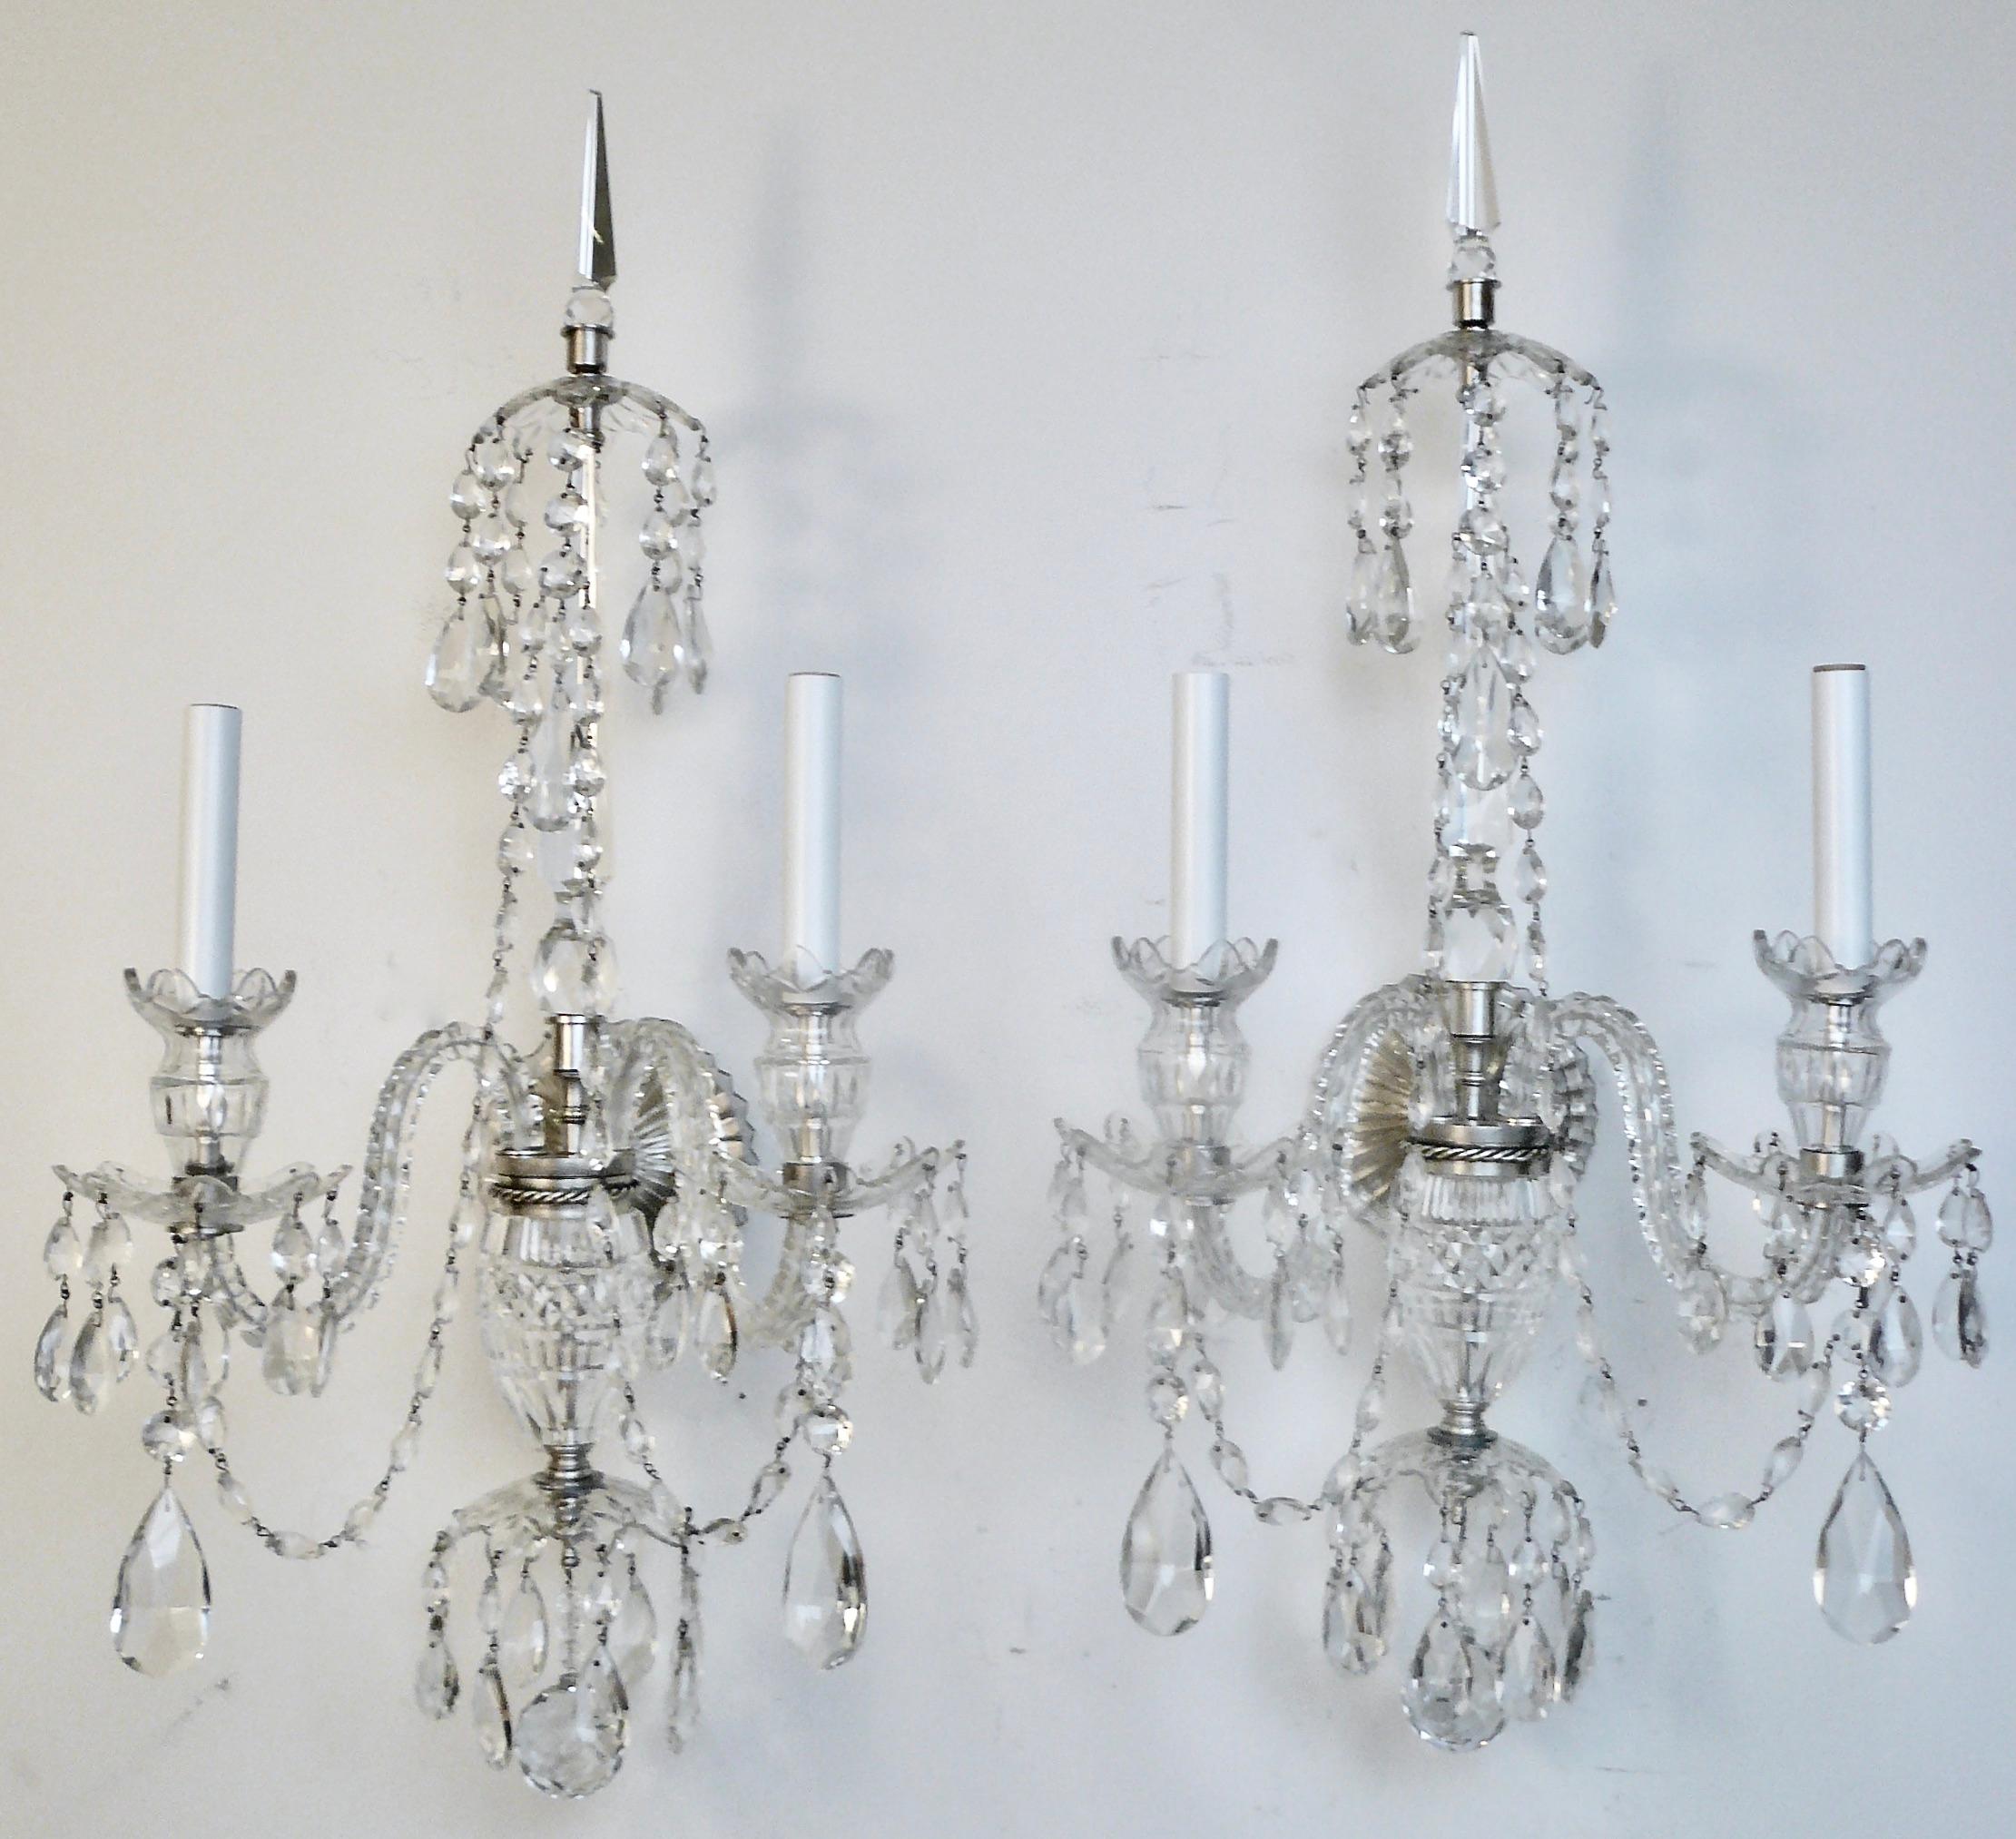 This large scale pair of Georgian style cut crystal two light sconces feature crystal spikes, swagged chains of graduated almond shaped prisms, and and silvered fittings. The sconces have faceted ball finials, Van Dyke style bobeches, and terminate